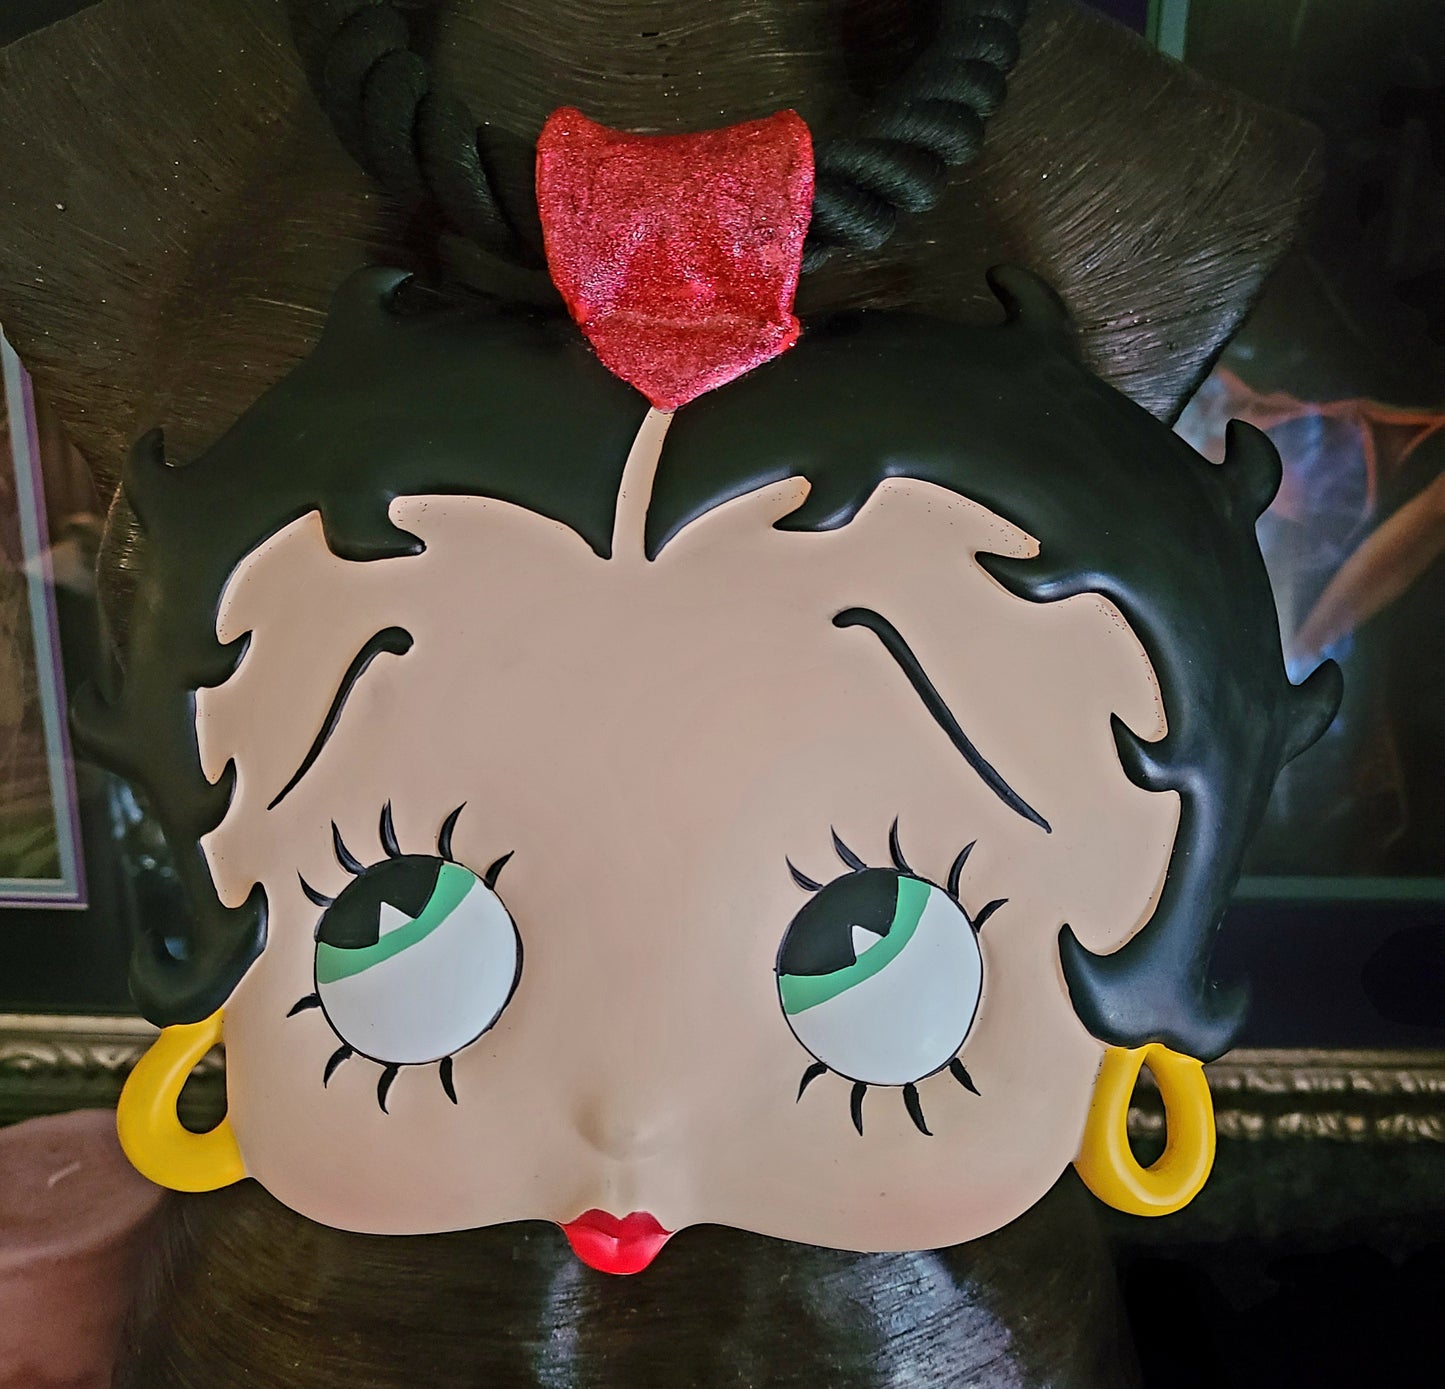 Chest Piece Betty Boop Face Plaque, Breastplate Vamp Femme Fatale, Jewelry Cartoon Character, Accessory Whimsical Eccentric,